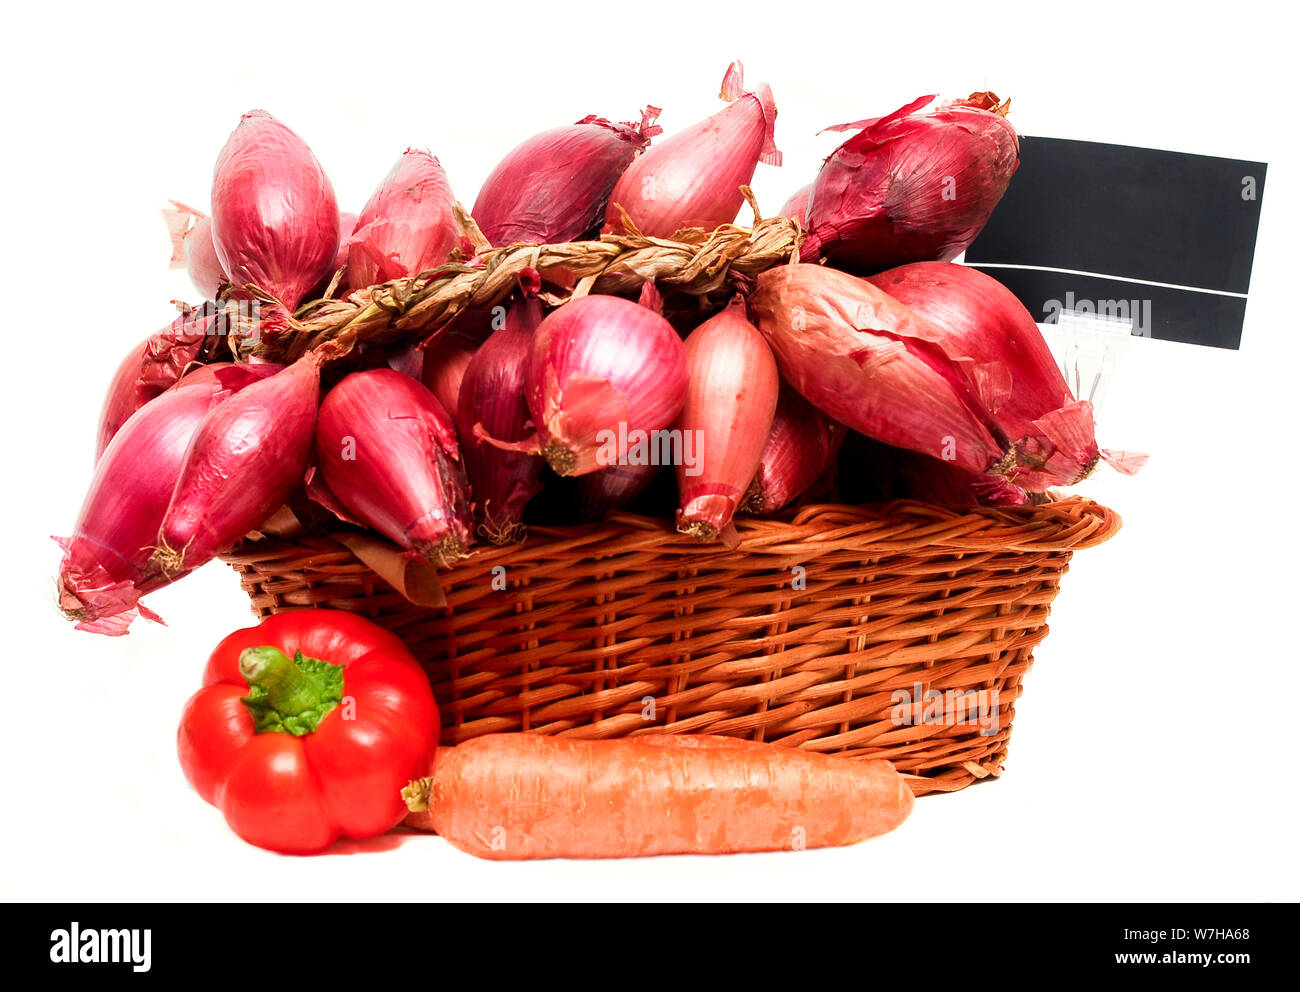 Basket full of red onions and price tag, isolated on white background. Stock Photo